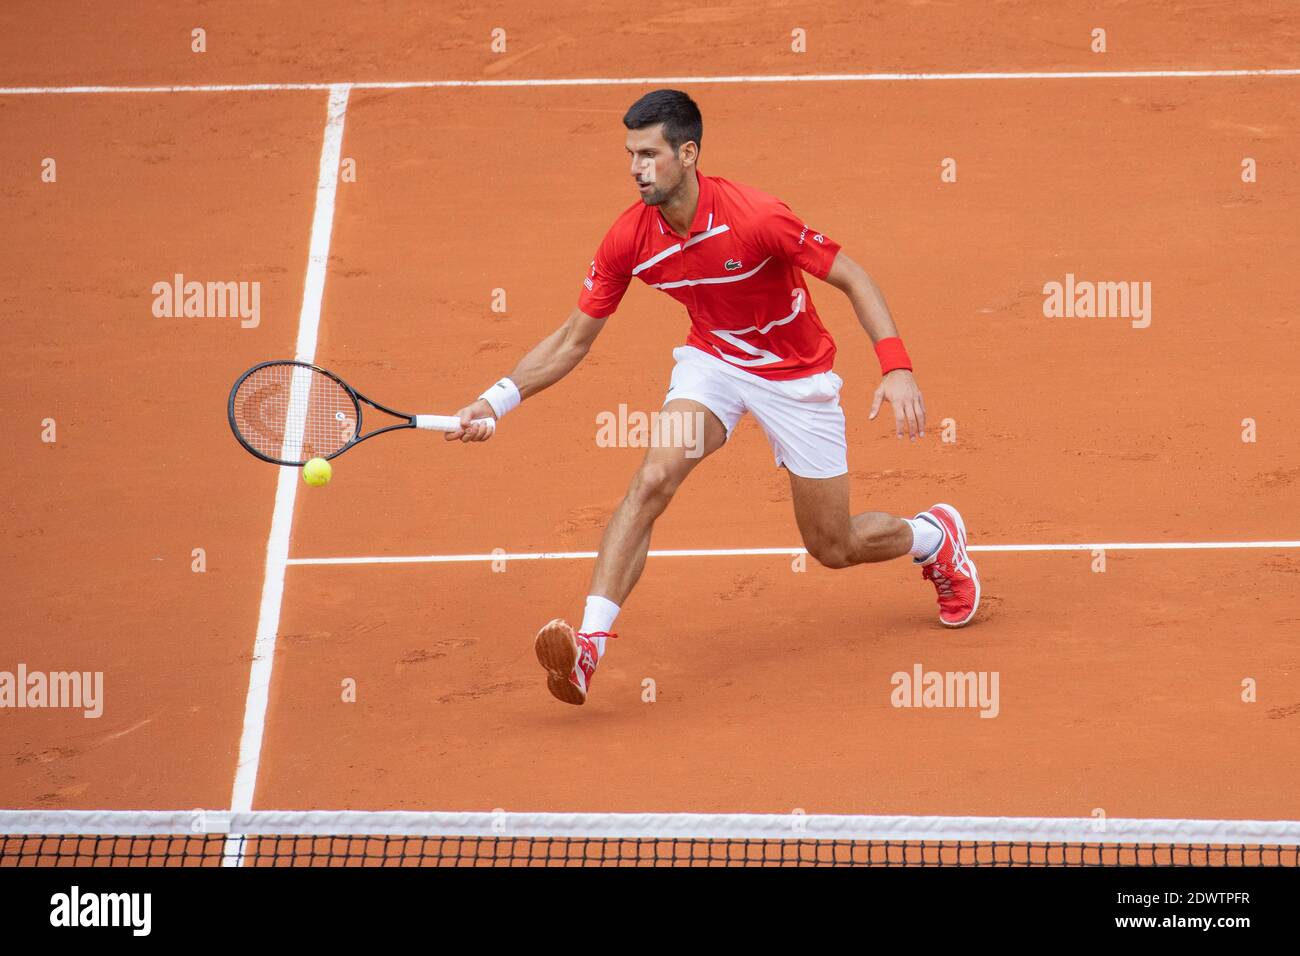 Serbian tennis player Novak Djokovic playing a forehand volley at French Open 2020, Paris, France, Europe. Stock Photo